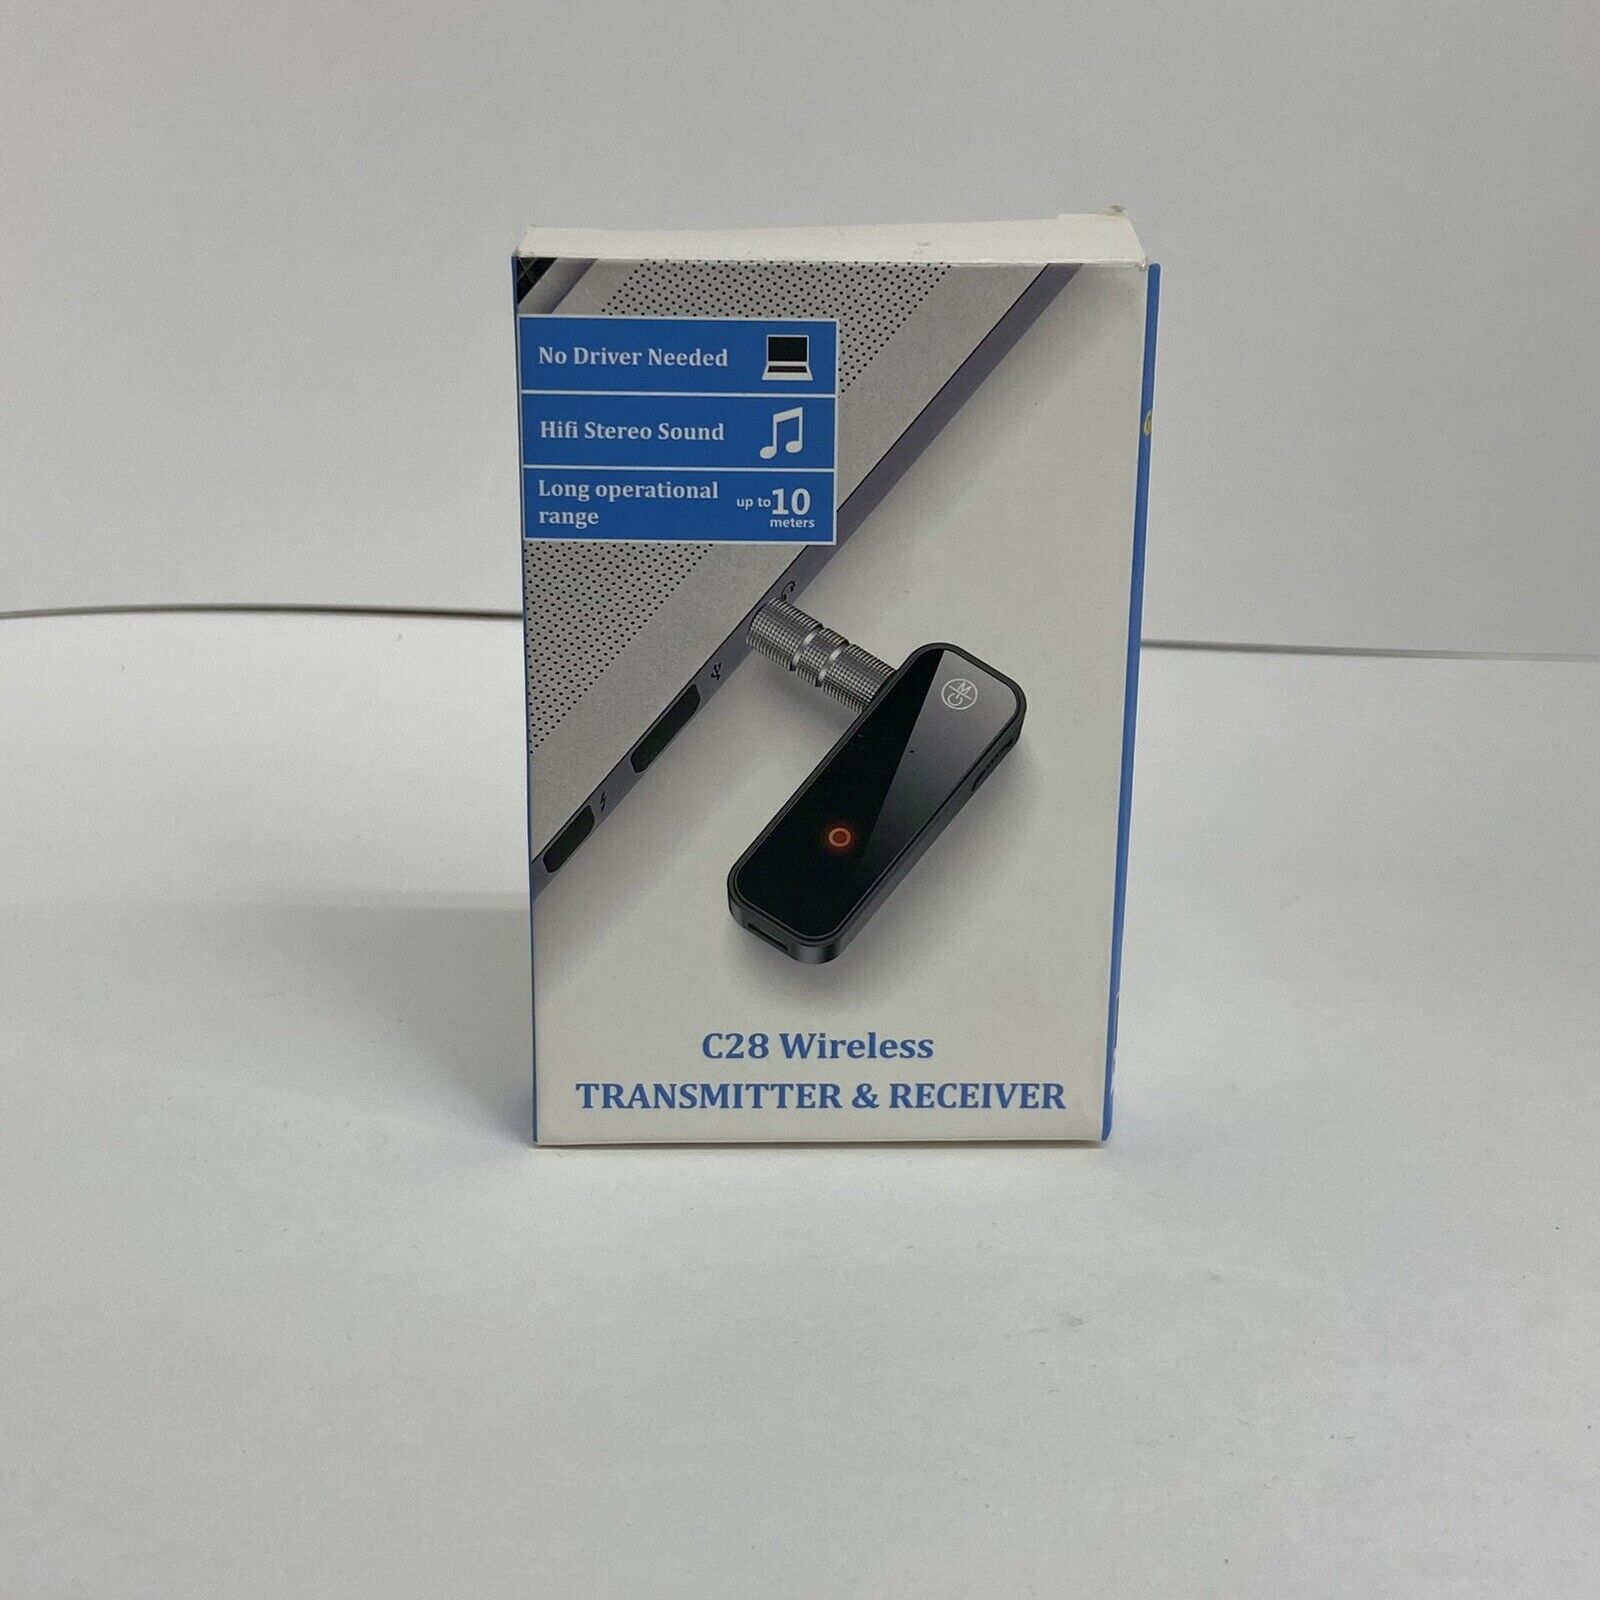 C28 Wireless Transmitter & Receiver - Bluetooth Connect Devices 3.5mm Jack NEW